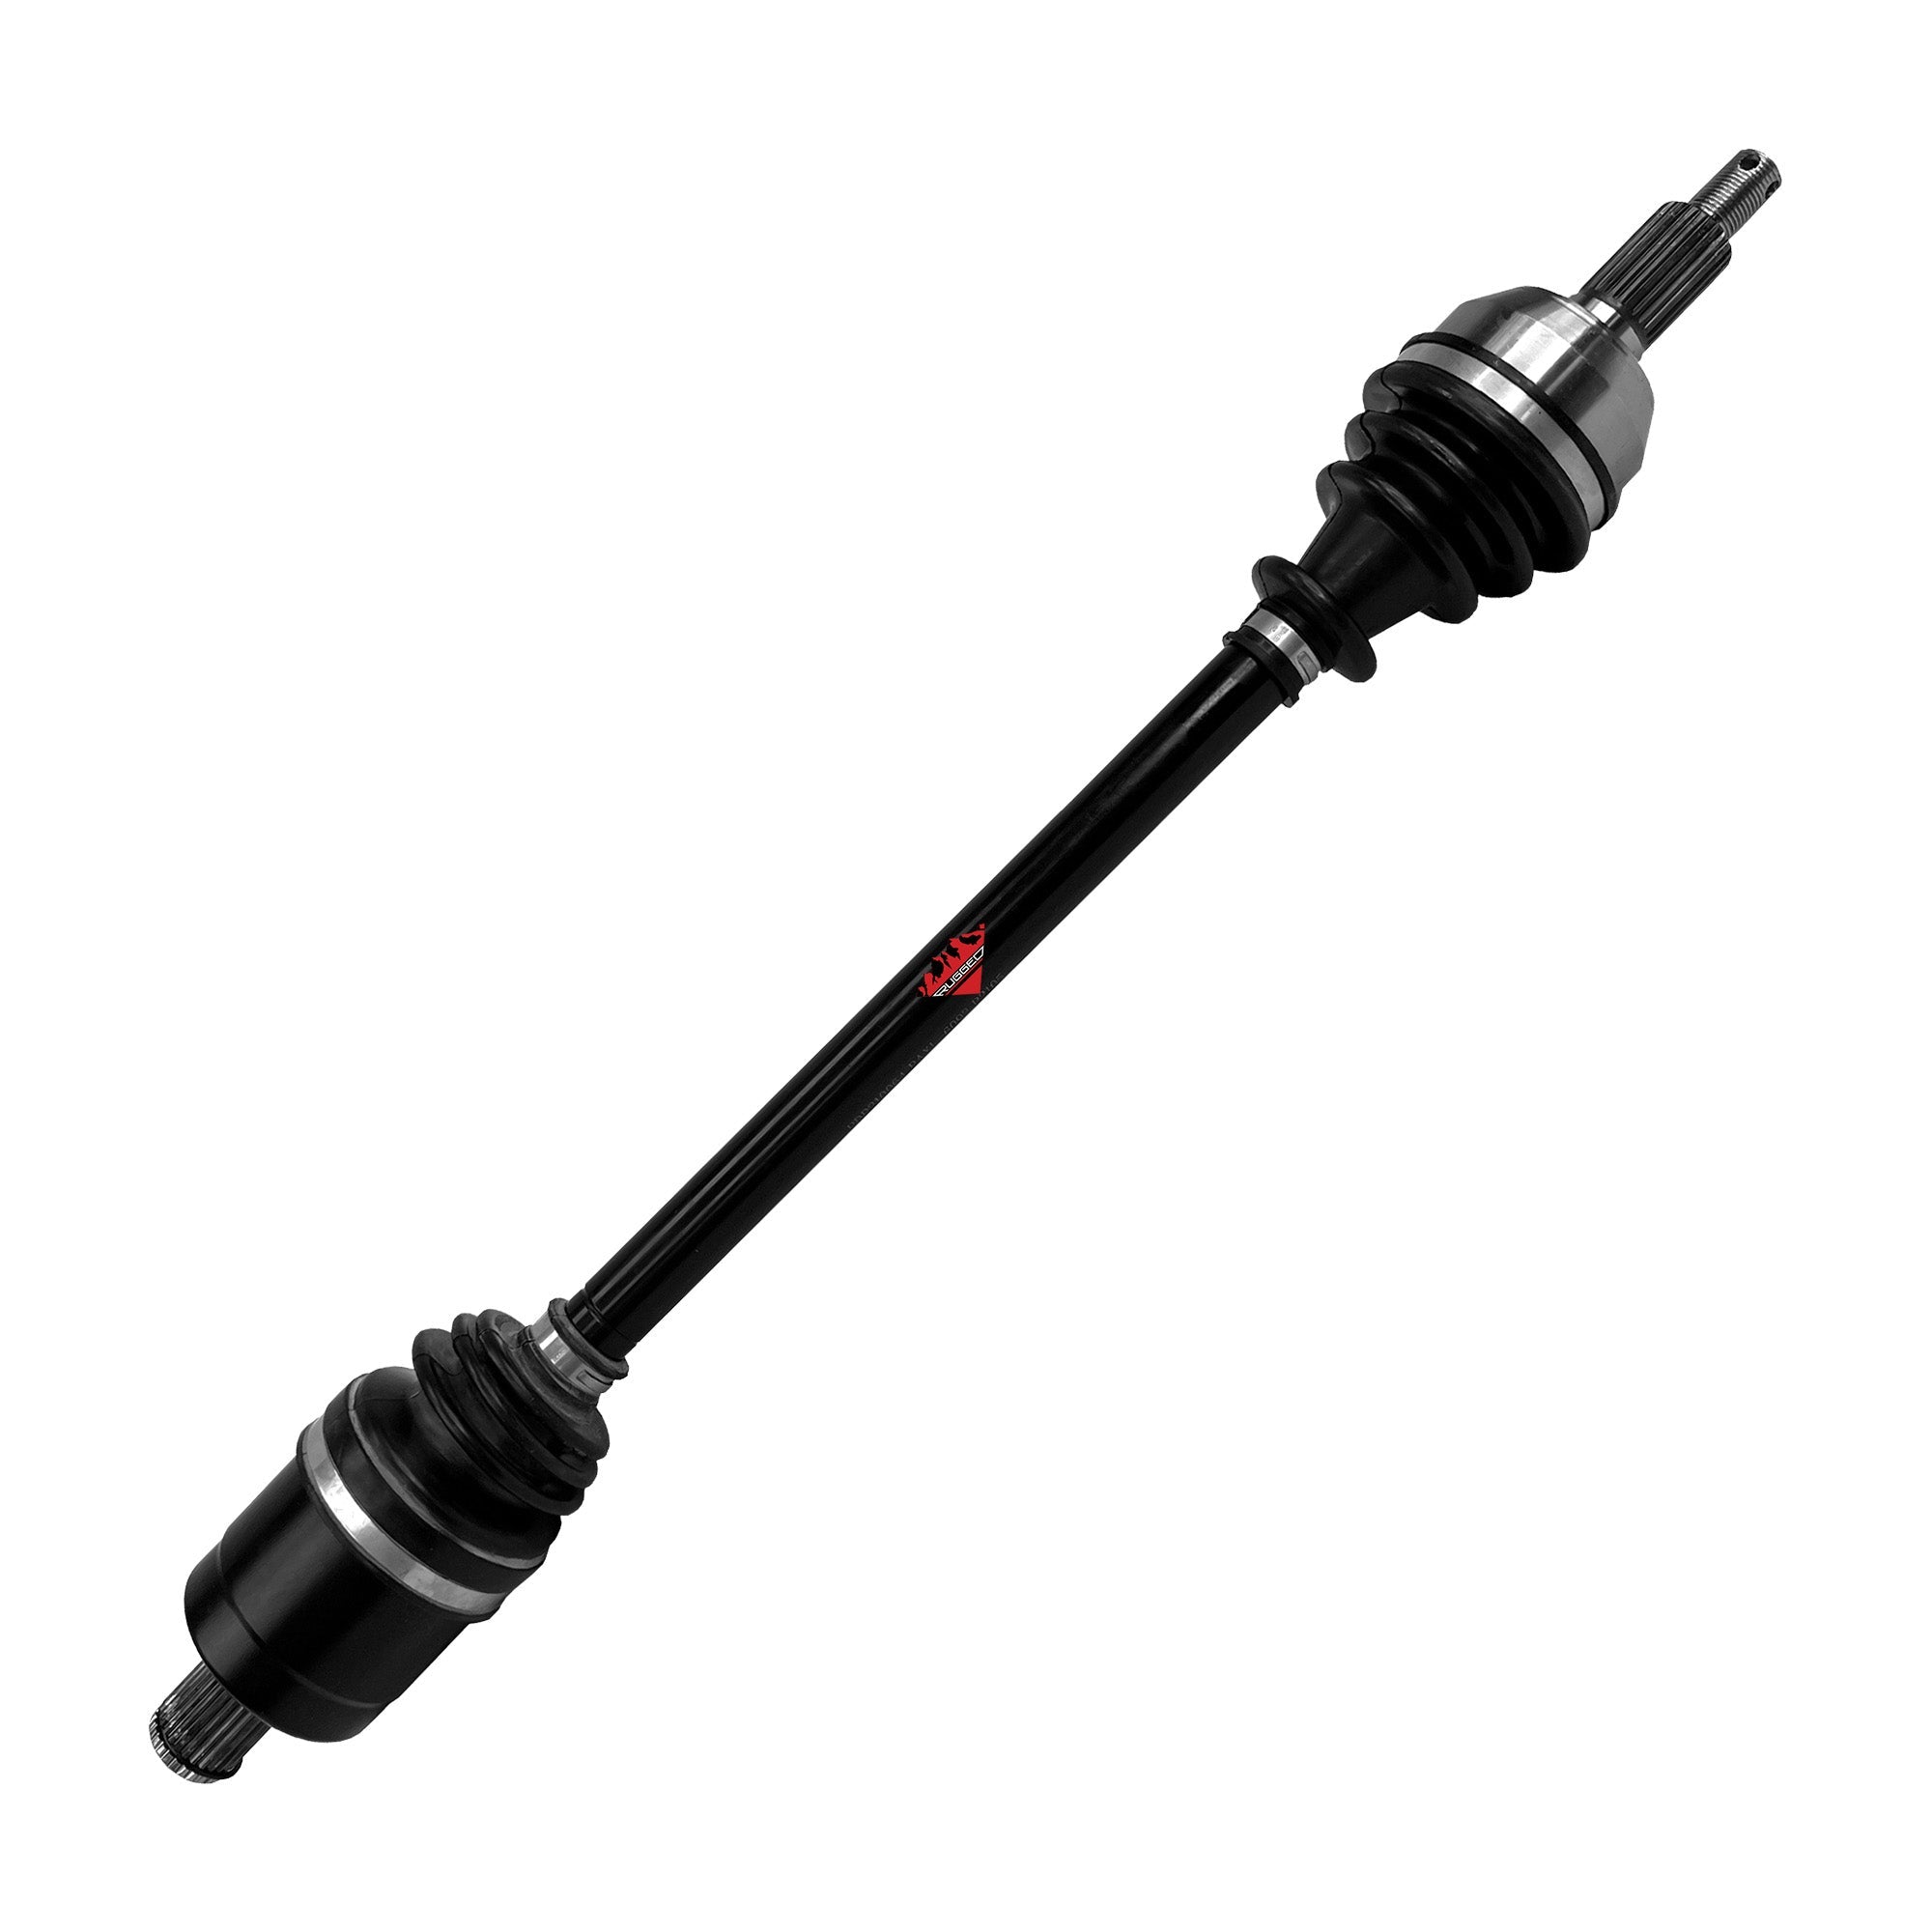 RZR Turbo front Rugged OE replacment axle